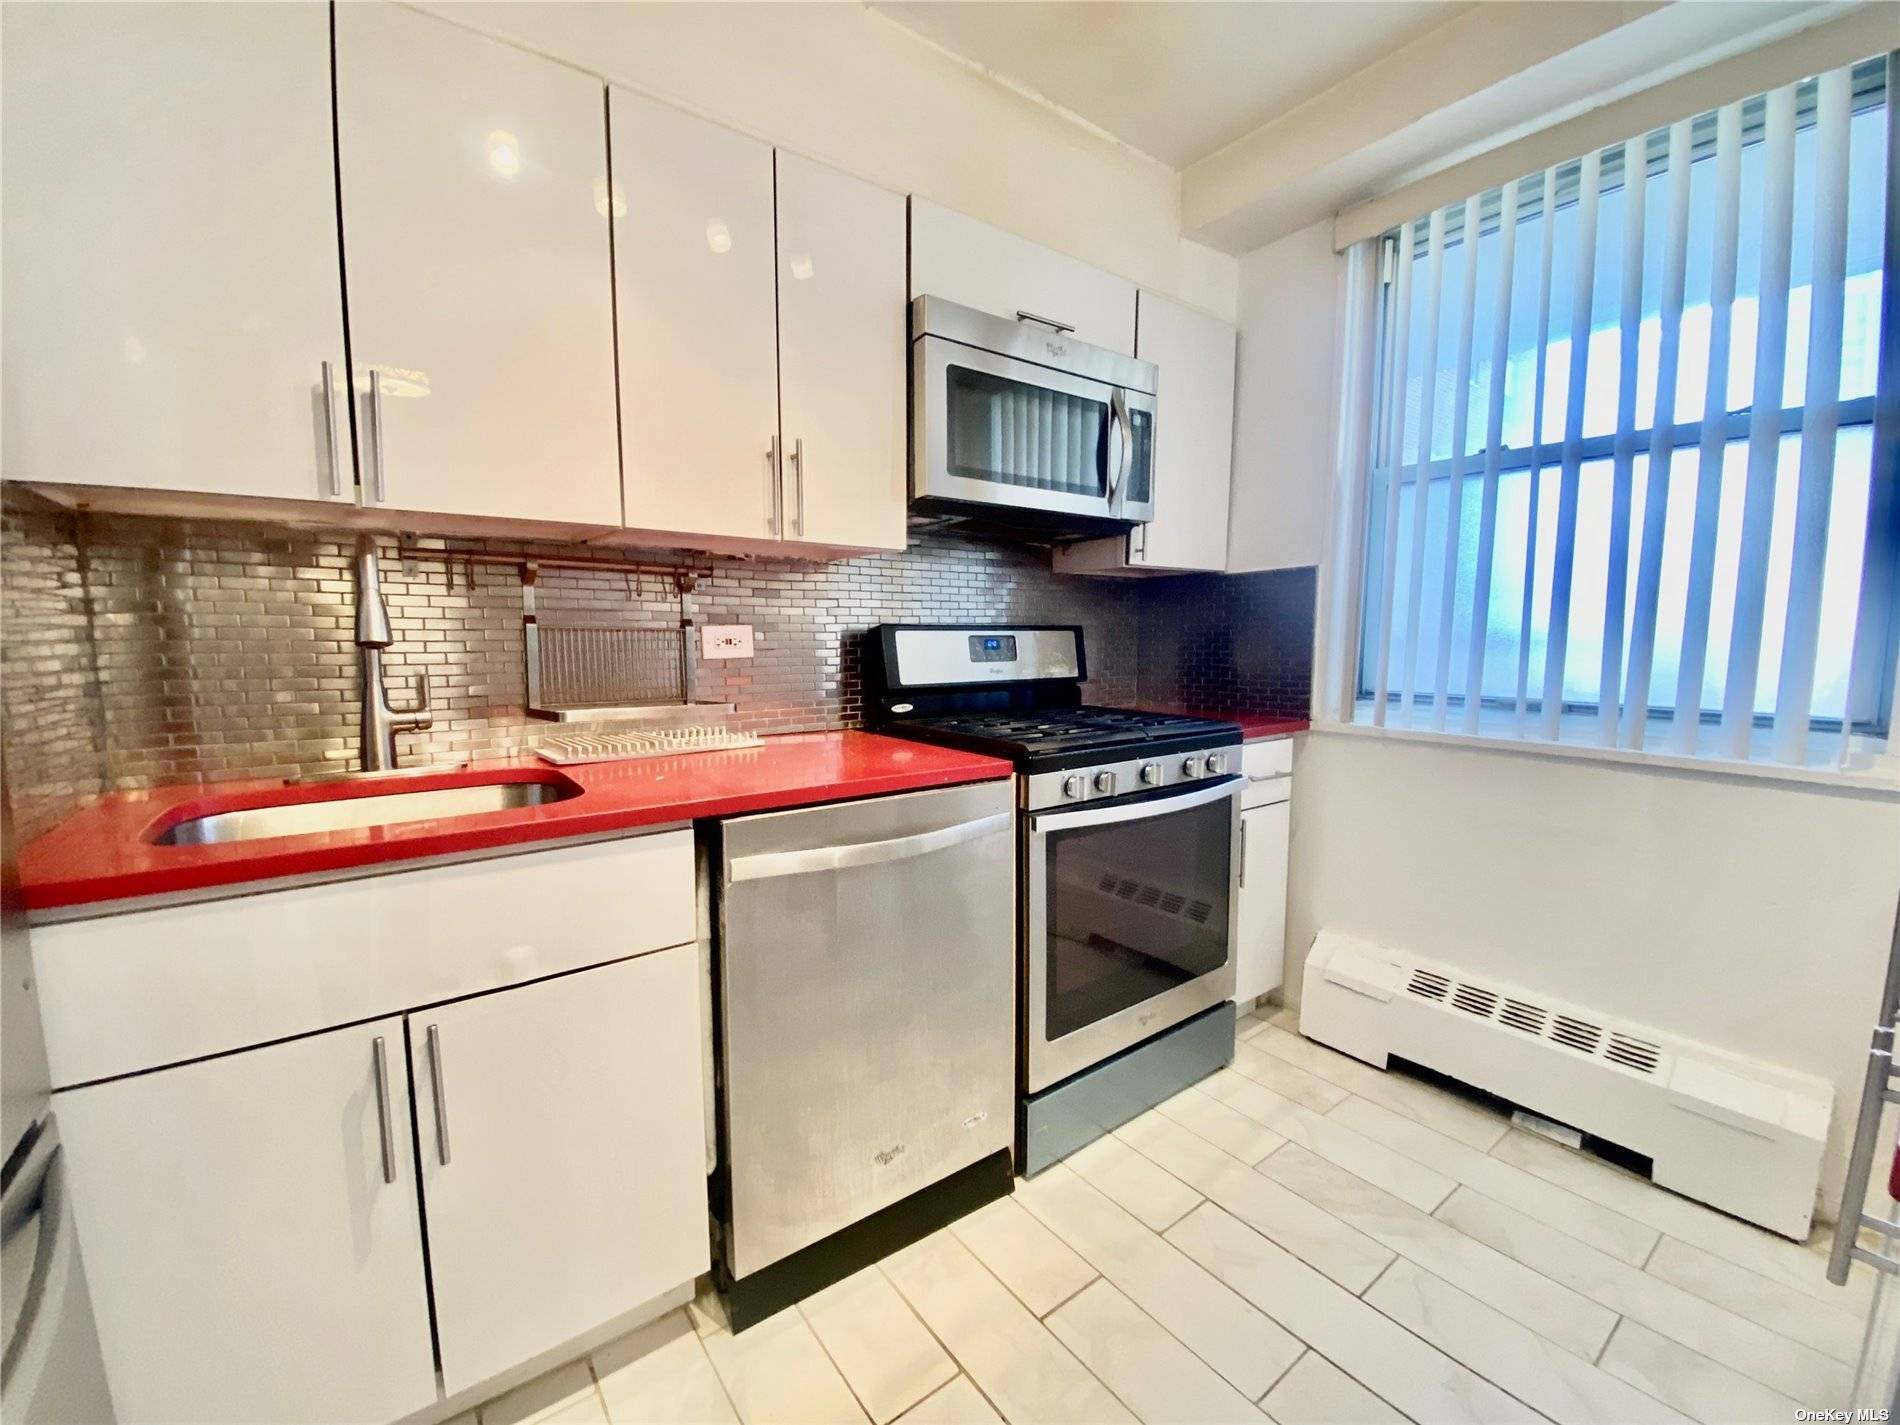 Here is your chance to own this bright 3 bedrooms, 2 full baths co op apartment.